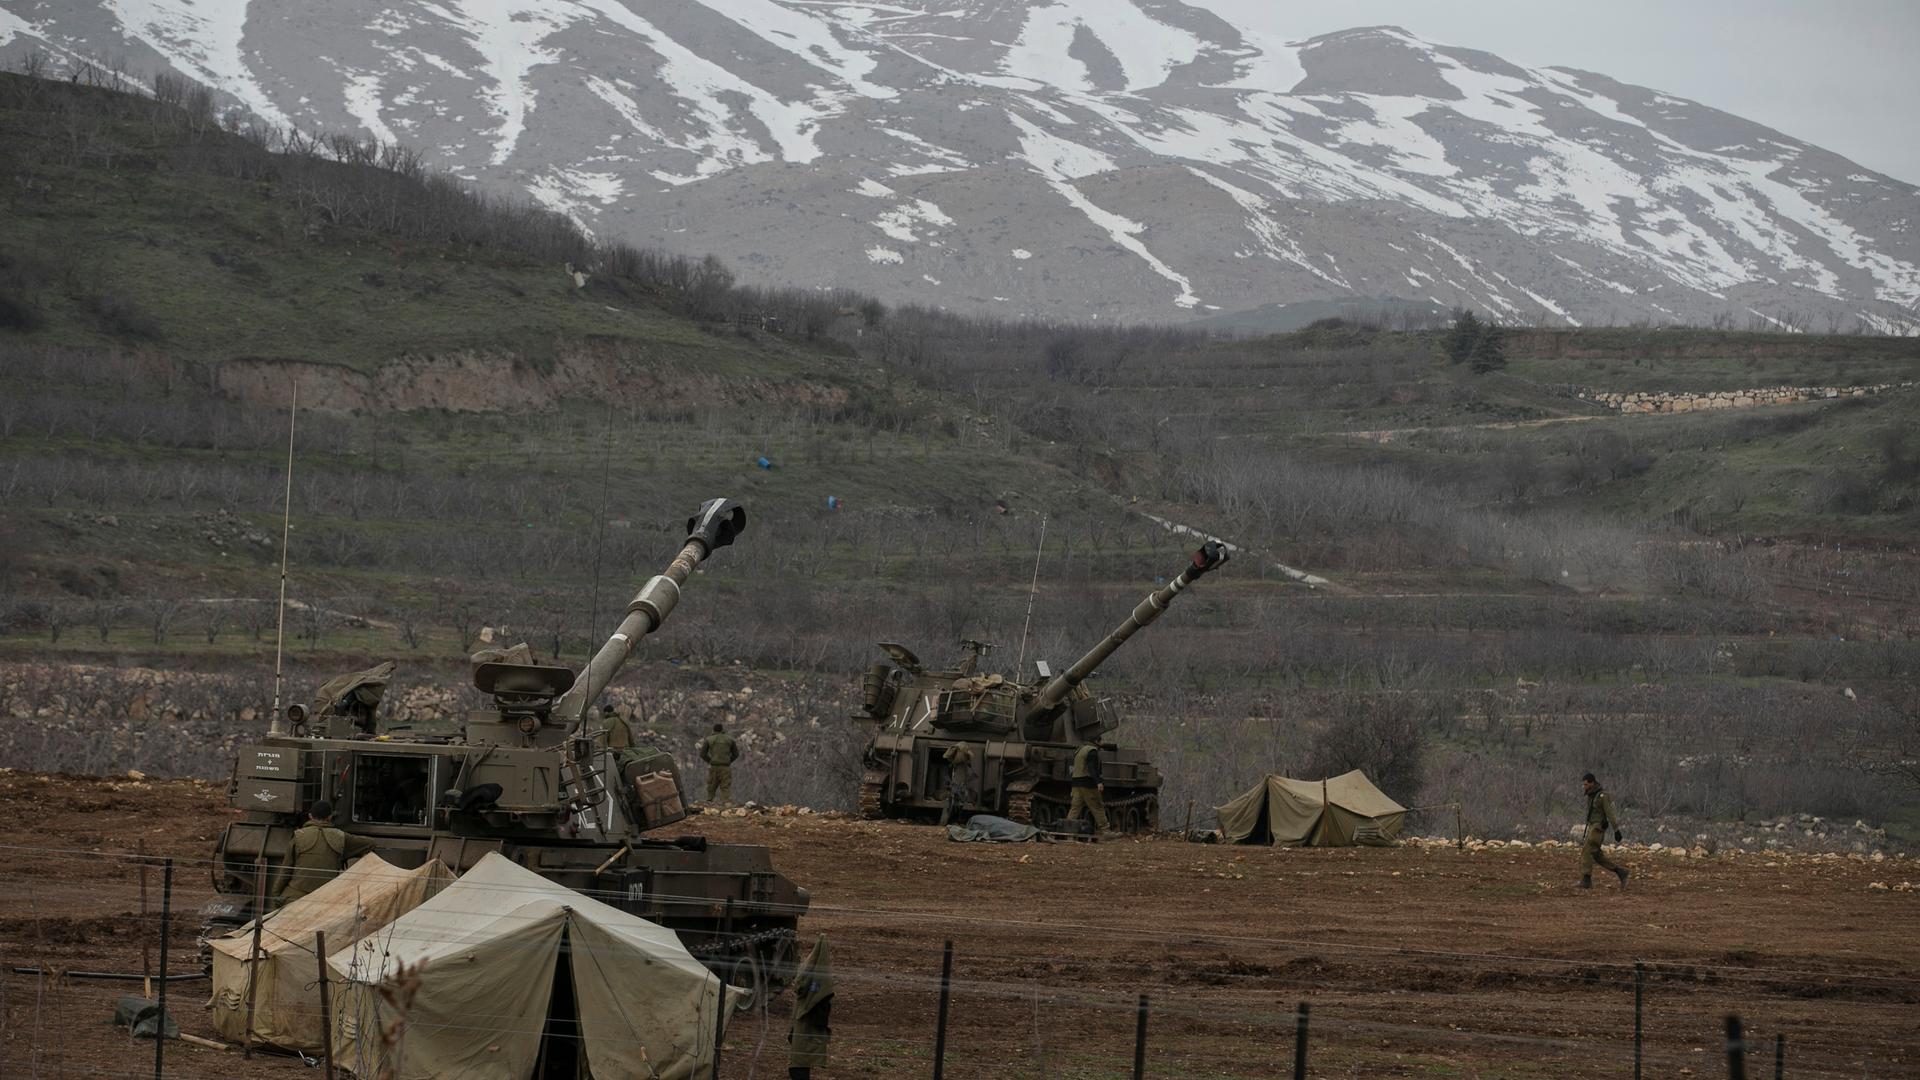 Israeli self-propelled artillery ready for action, near the border with Syria in the Golan Heights. Picture taken Jan 27th 2015.